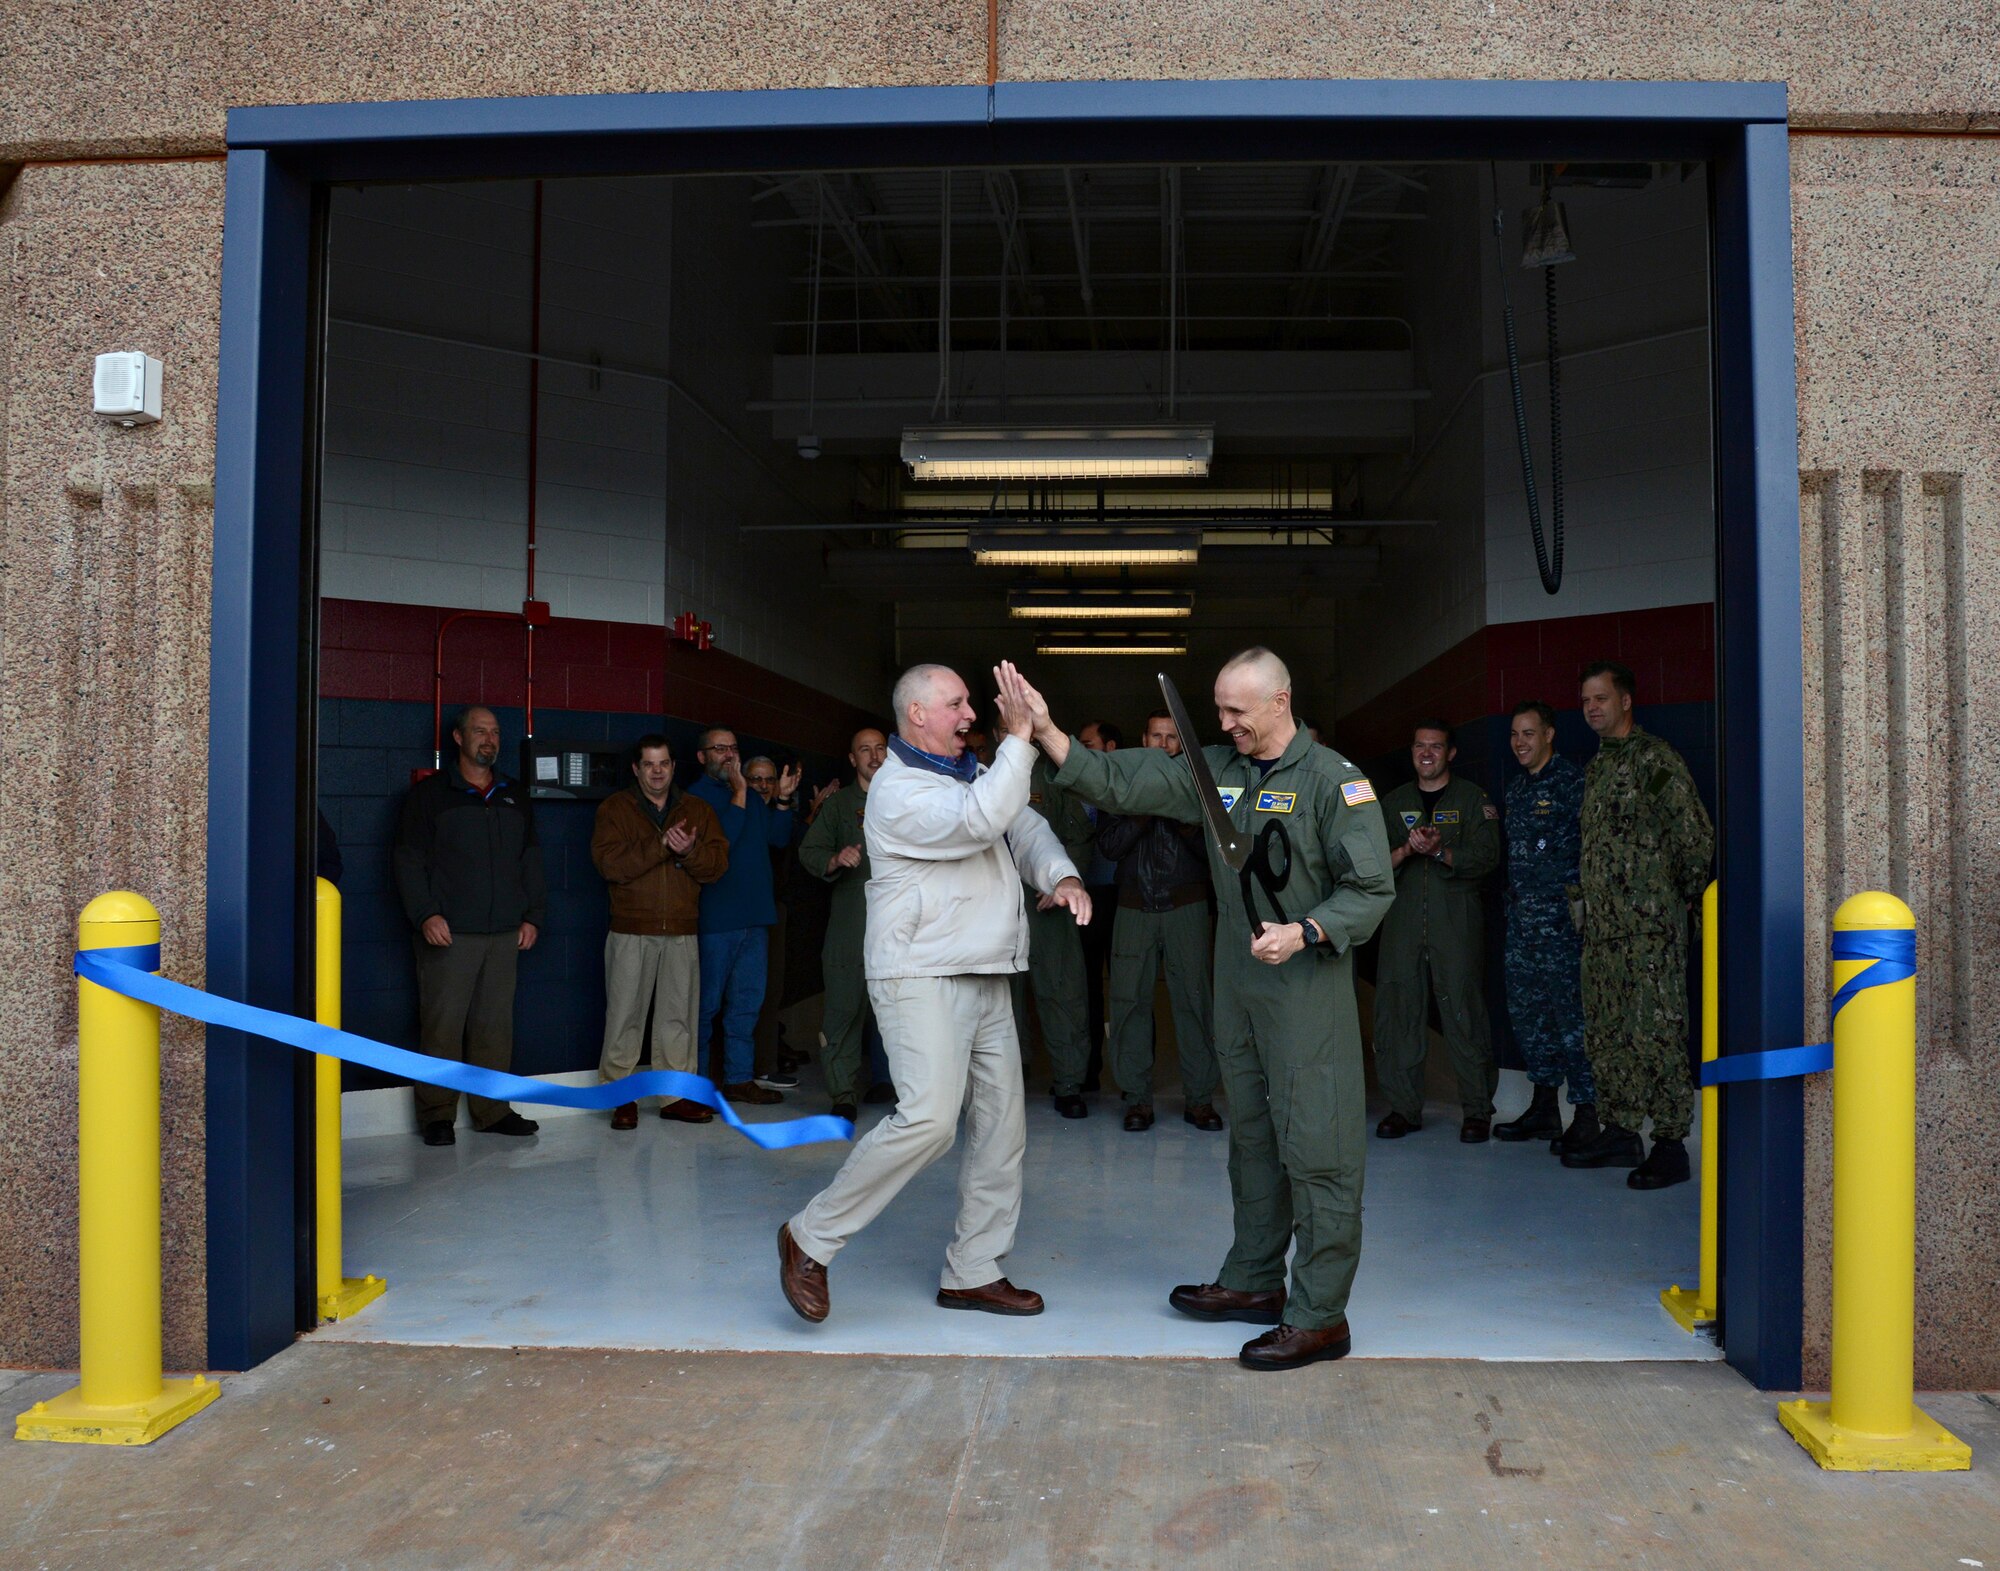 Scott Appleton, with HGL Construction in Midwest City, left, and Capt. Ed McCabe, commander of Strategic Communications Wing ONE and Task Force 124, cut the ceremonial ribbon Nov. 22, officially opening Bldg. 824, TACAMO’s newest hangar. The 36,000-square-foot building will be able to accommodate depot-level maintenance on the Navy’s E-6B Mercury. (Air Force photo by Kelly White)